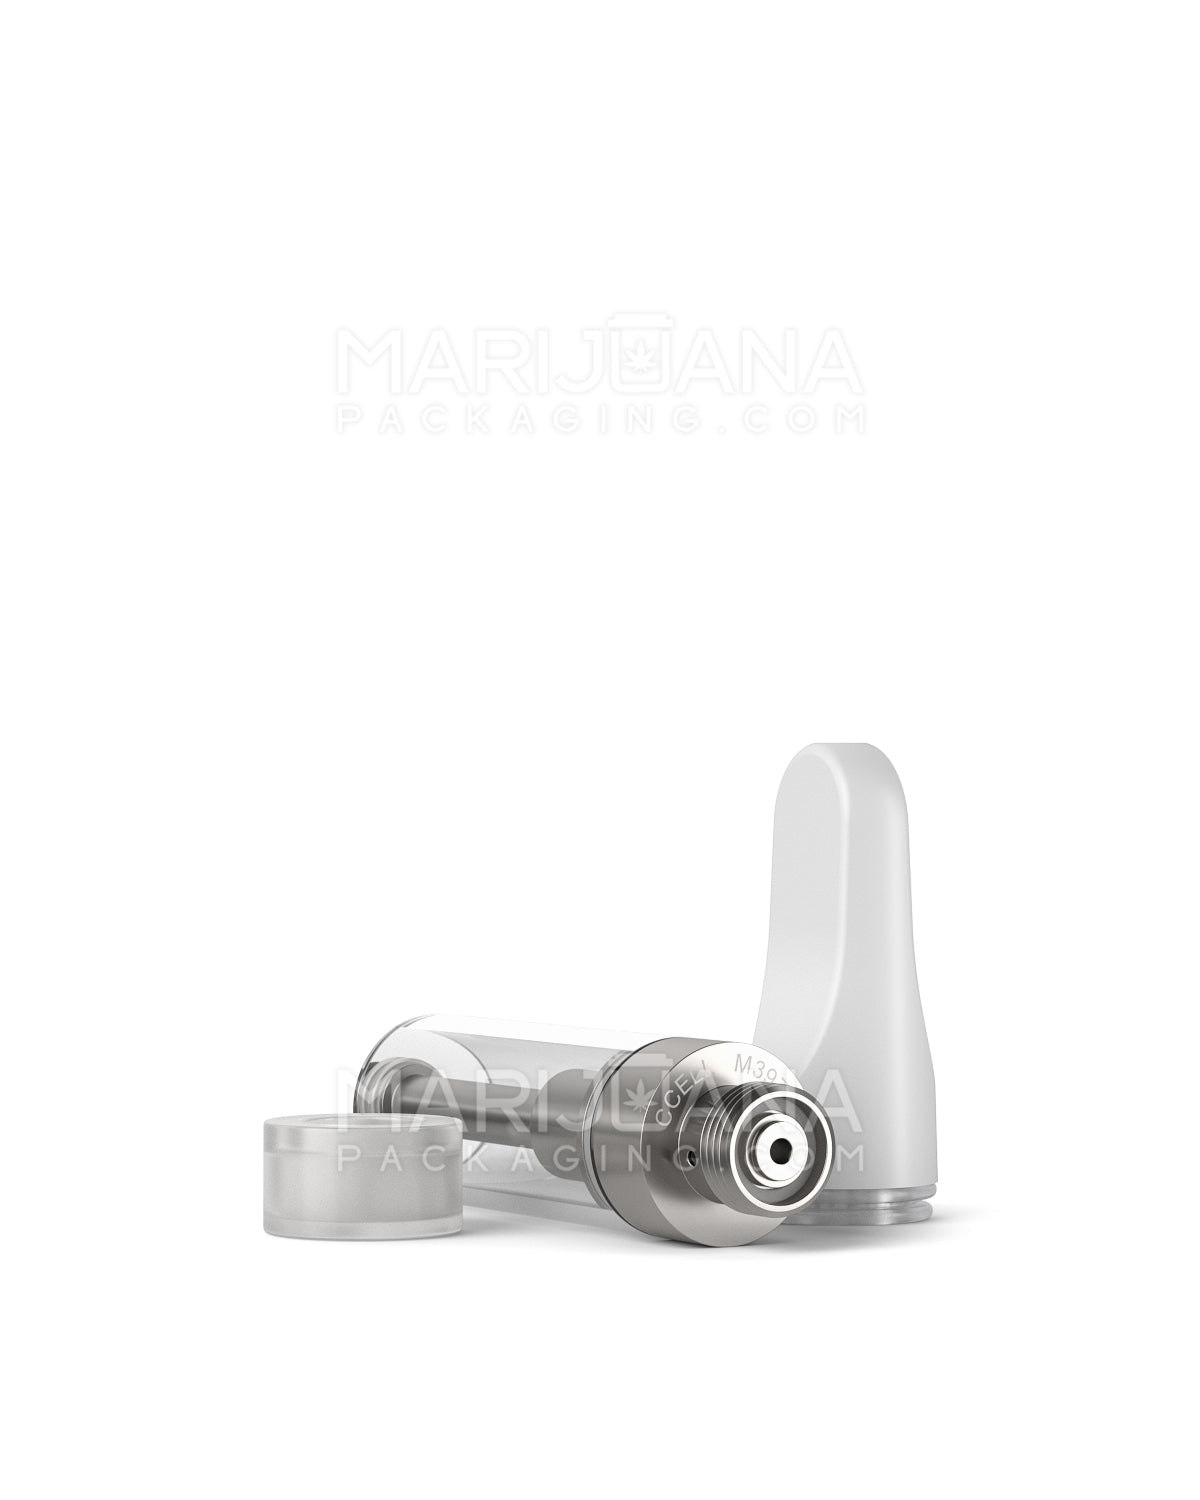 CCELL | Liquid6 Reactor Glass Vape Cartridge with White Plastic Mouthpiece | 1mL - Screw On - 100 Count - 8